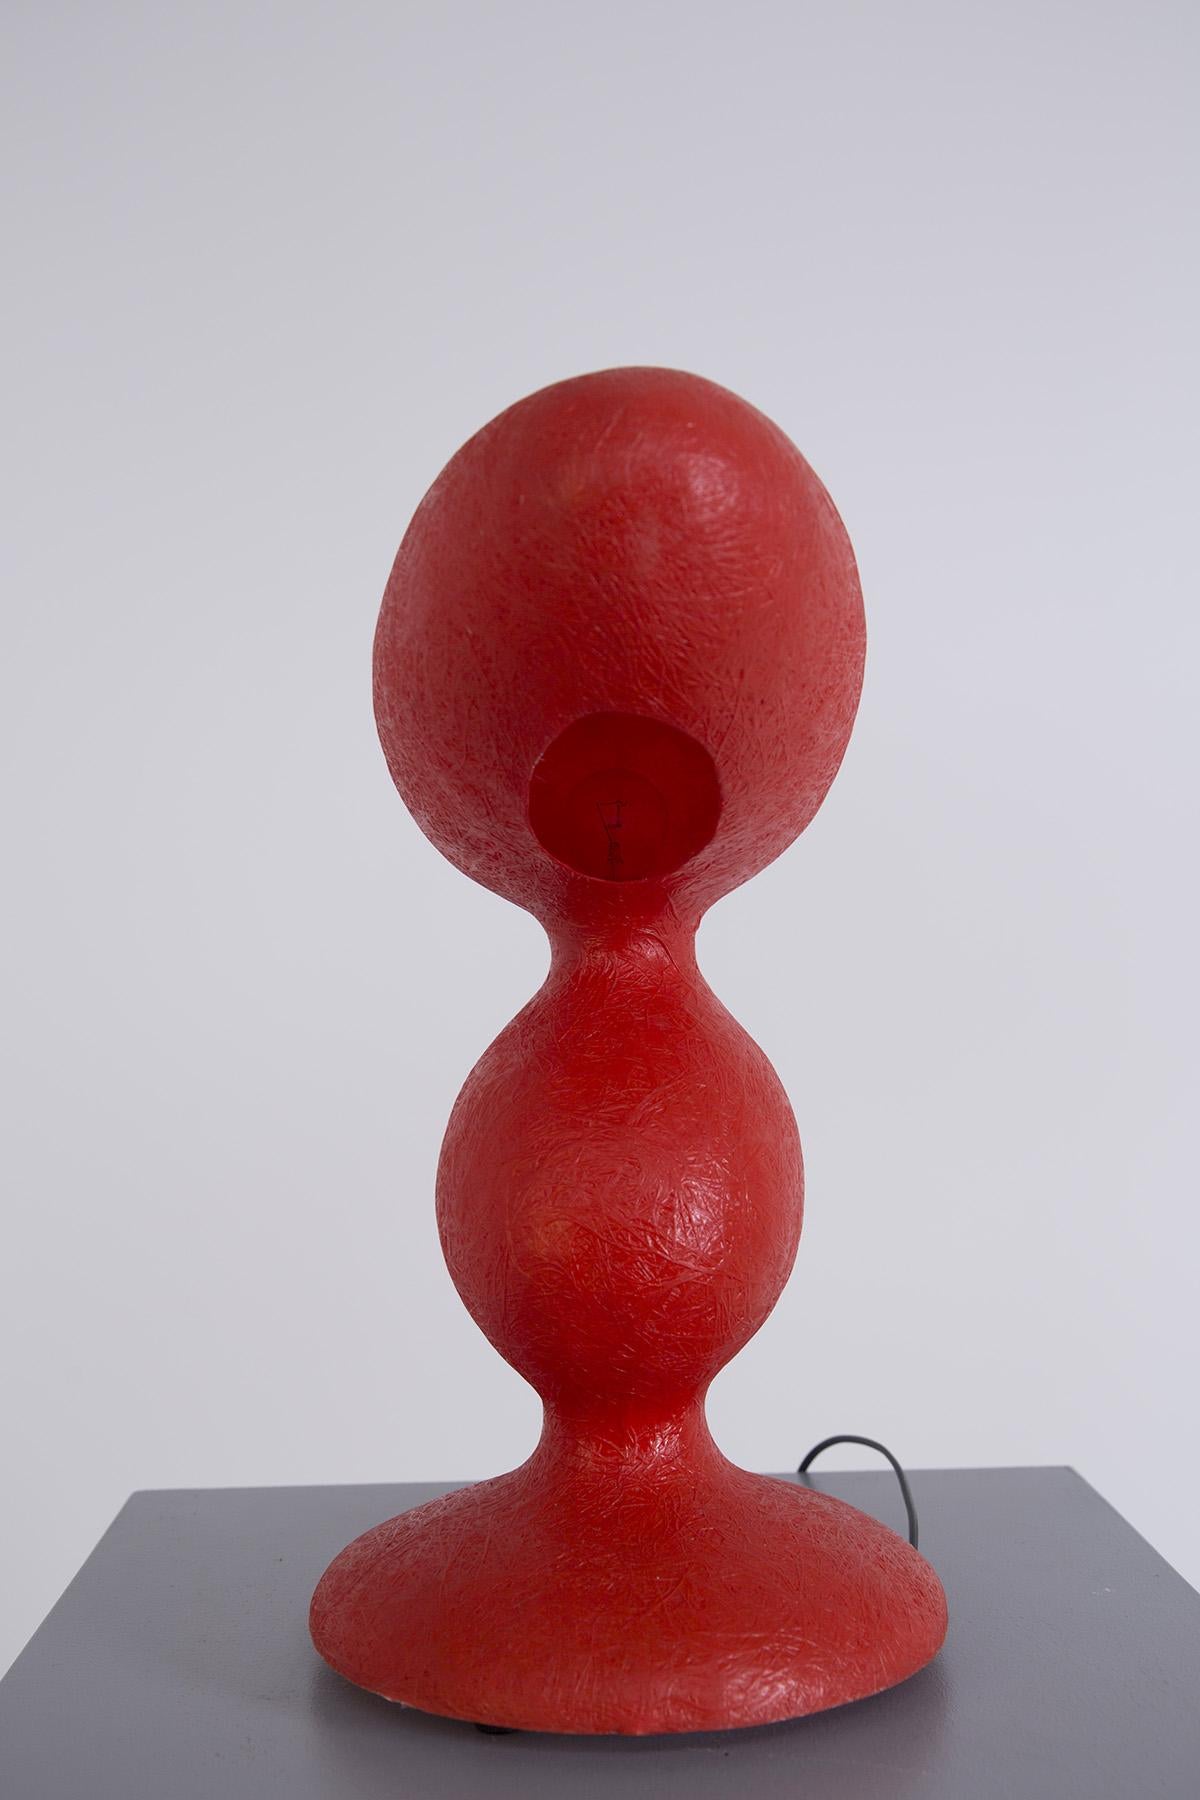 Stunning red sculptural table lamp, model Kundalini ETA designed by Guglielmo Berchicci for Kundalini Italian manufactory.
The beautiful lamp for its refined artistic aesthetic with the style of a free-flowing sculpture, has always been Berchicci's